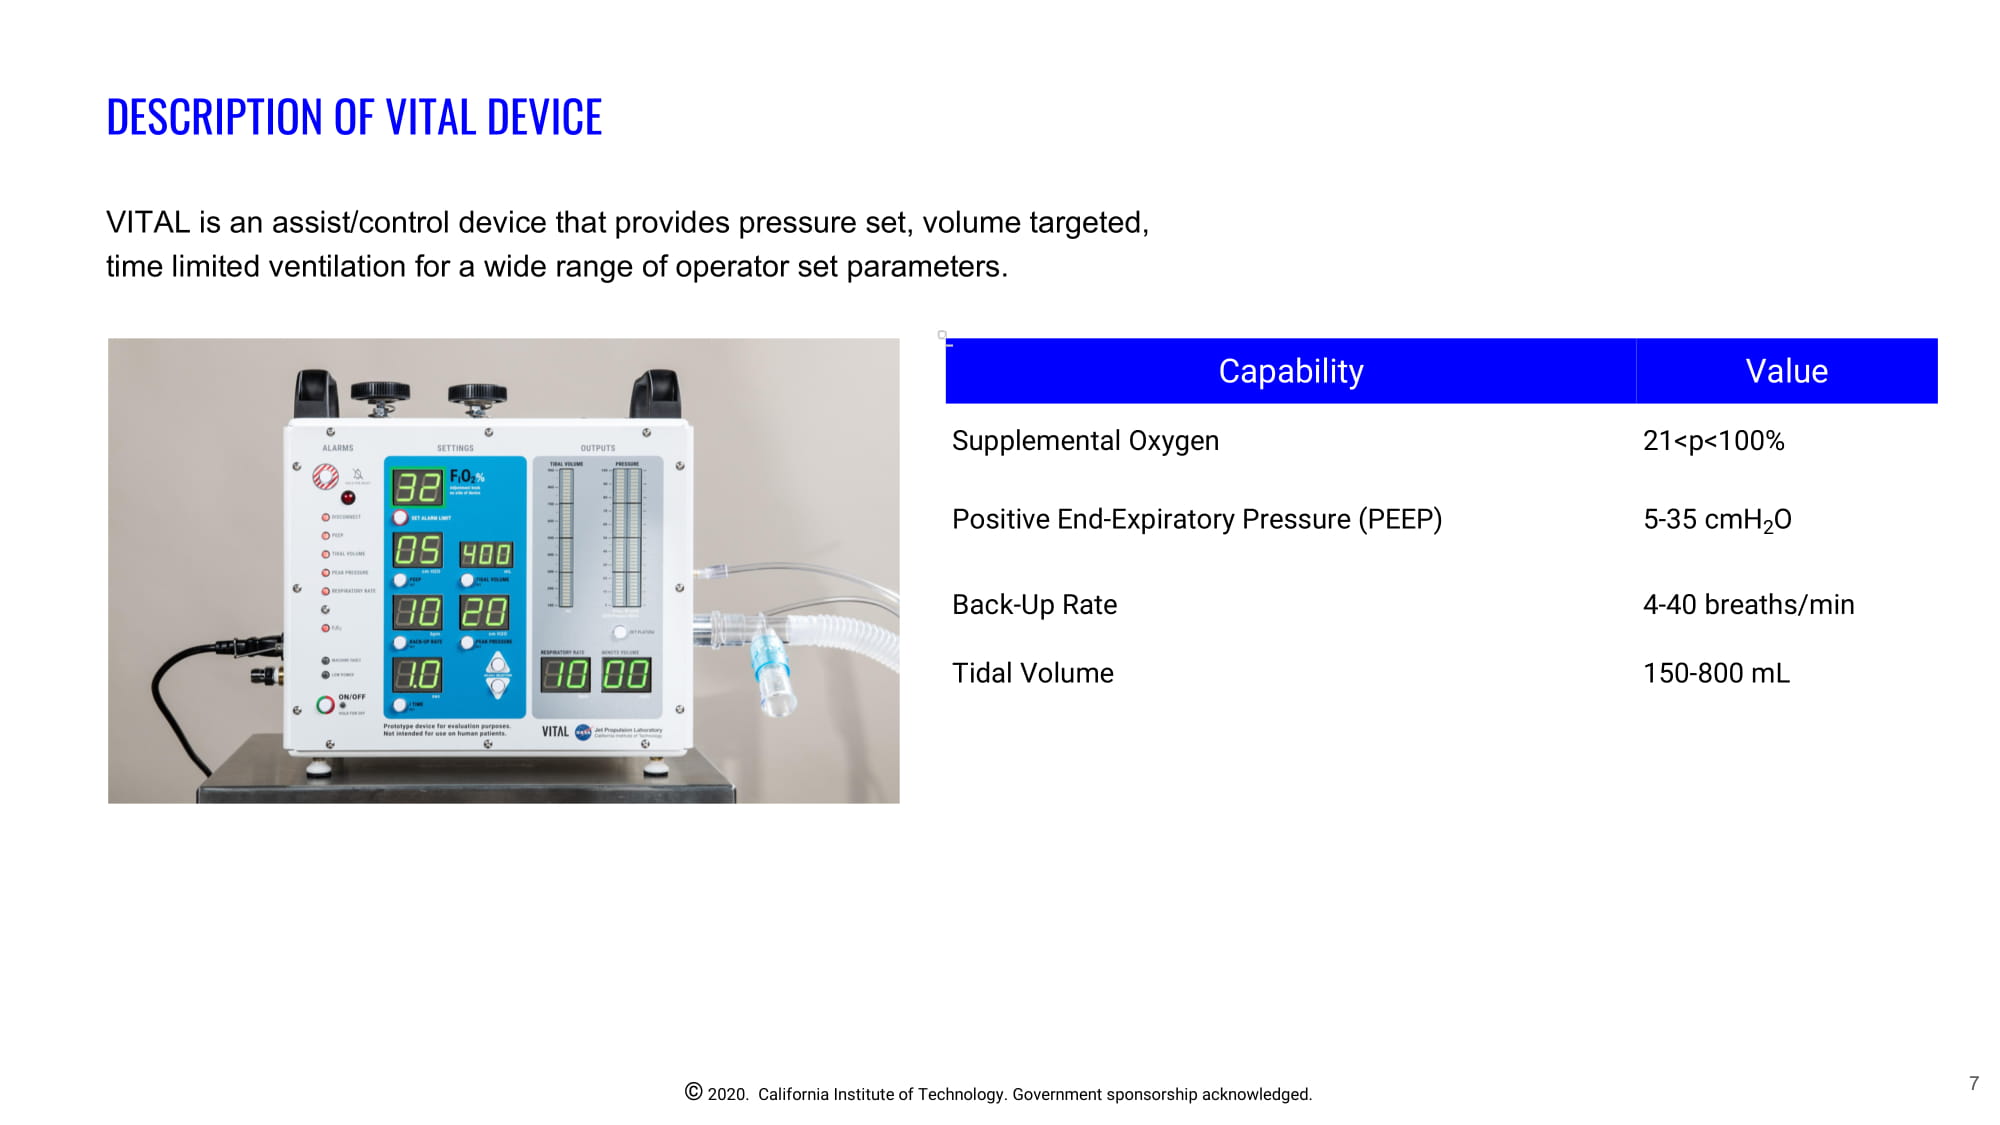 Slide 7: INTENDED USE ENVIRONMENT: The target patient population may or may not have access to traditional hospital settings.  Therefore, the VITAL device would need to handle the dirt and dust of a ﬁeld setting similar to the EMS Use Environment, but would operate in an environment with relatively benign temperature and water exposure.  Moreover, the devices do not need to travel with the patients between venues (EMS ventilators can be used for that role), so the VITAL device does not need to operate while moving.